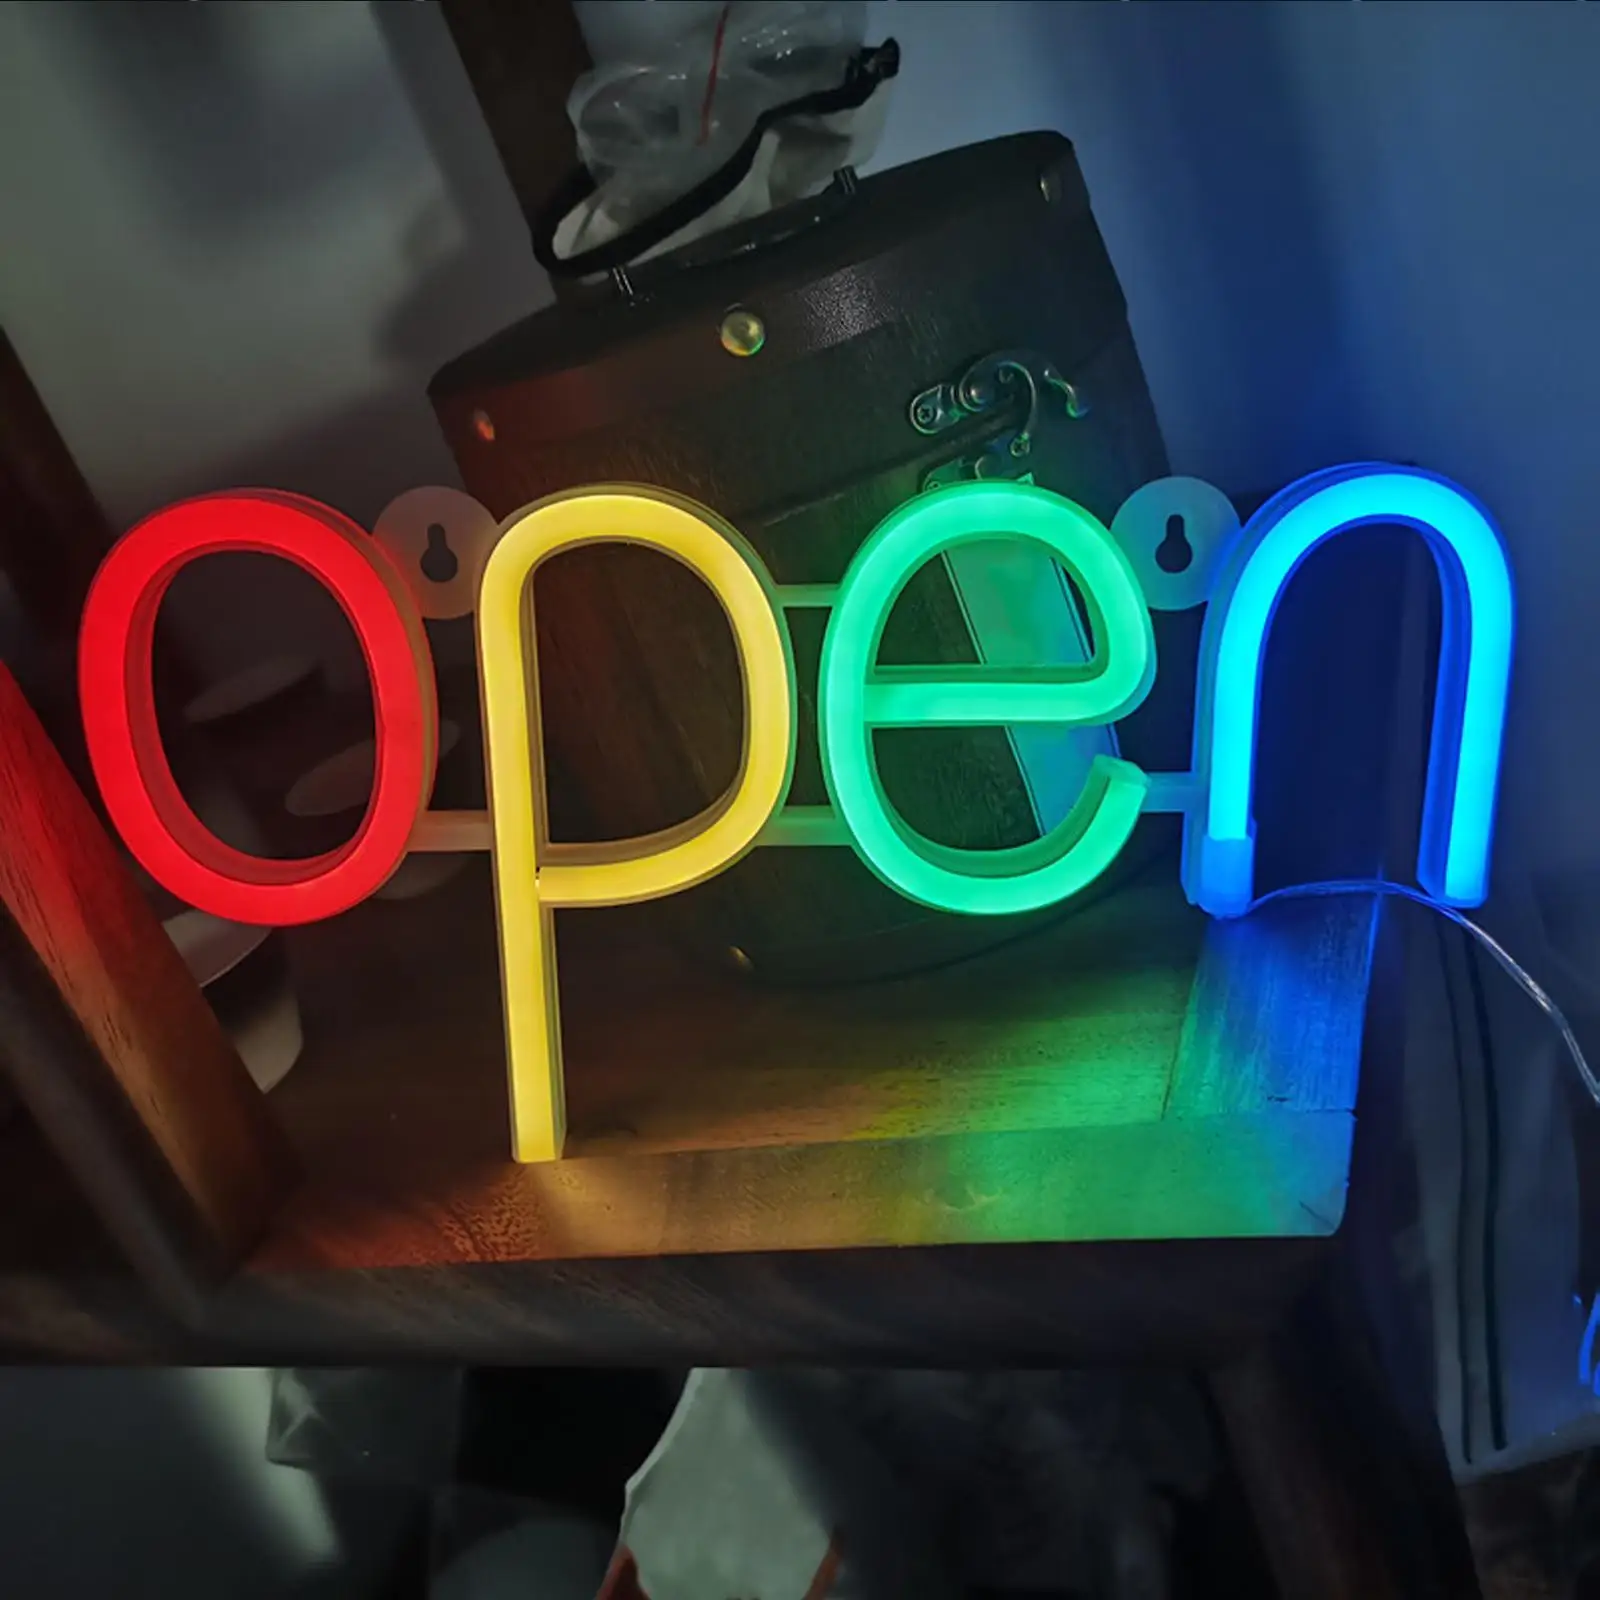 LED Open Sign Lighting Light Neon Lights Restaurant Fixture Wall Hanging Battery Powered Salon for Cafe Pun Home Bedroom Club